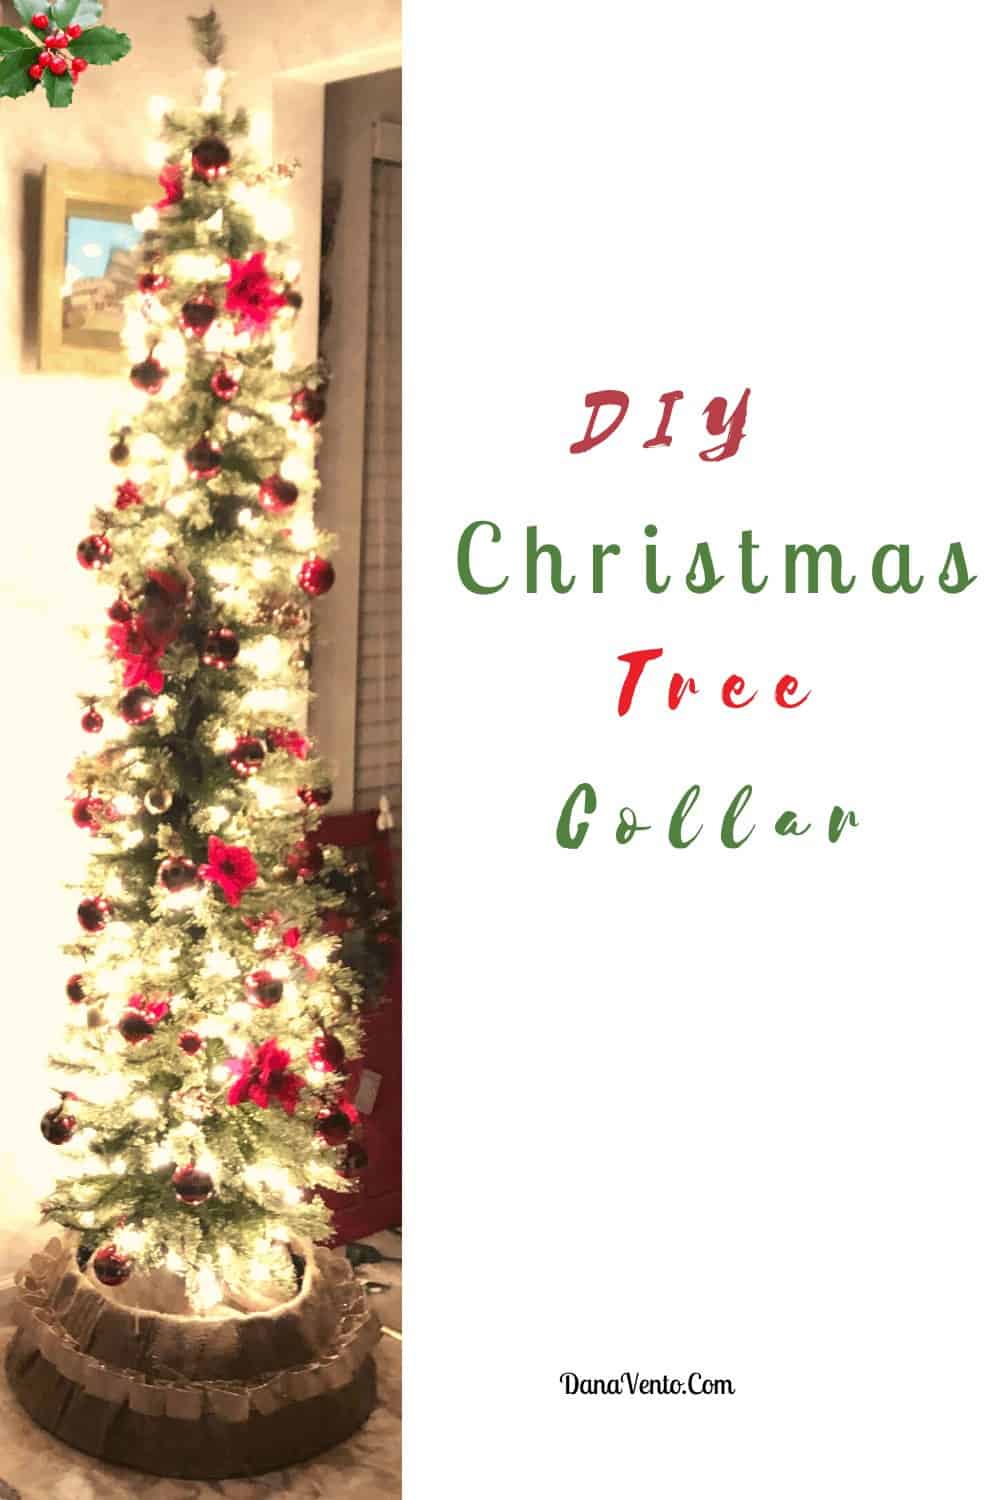 DIY Christmas Tree Collar For Under $6 and It's Easy To Make